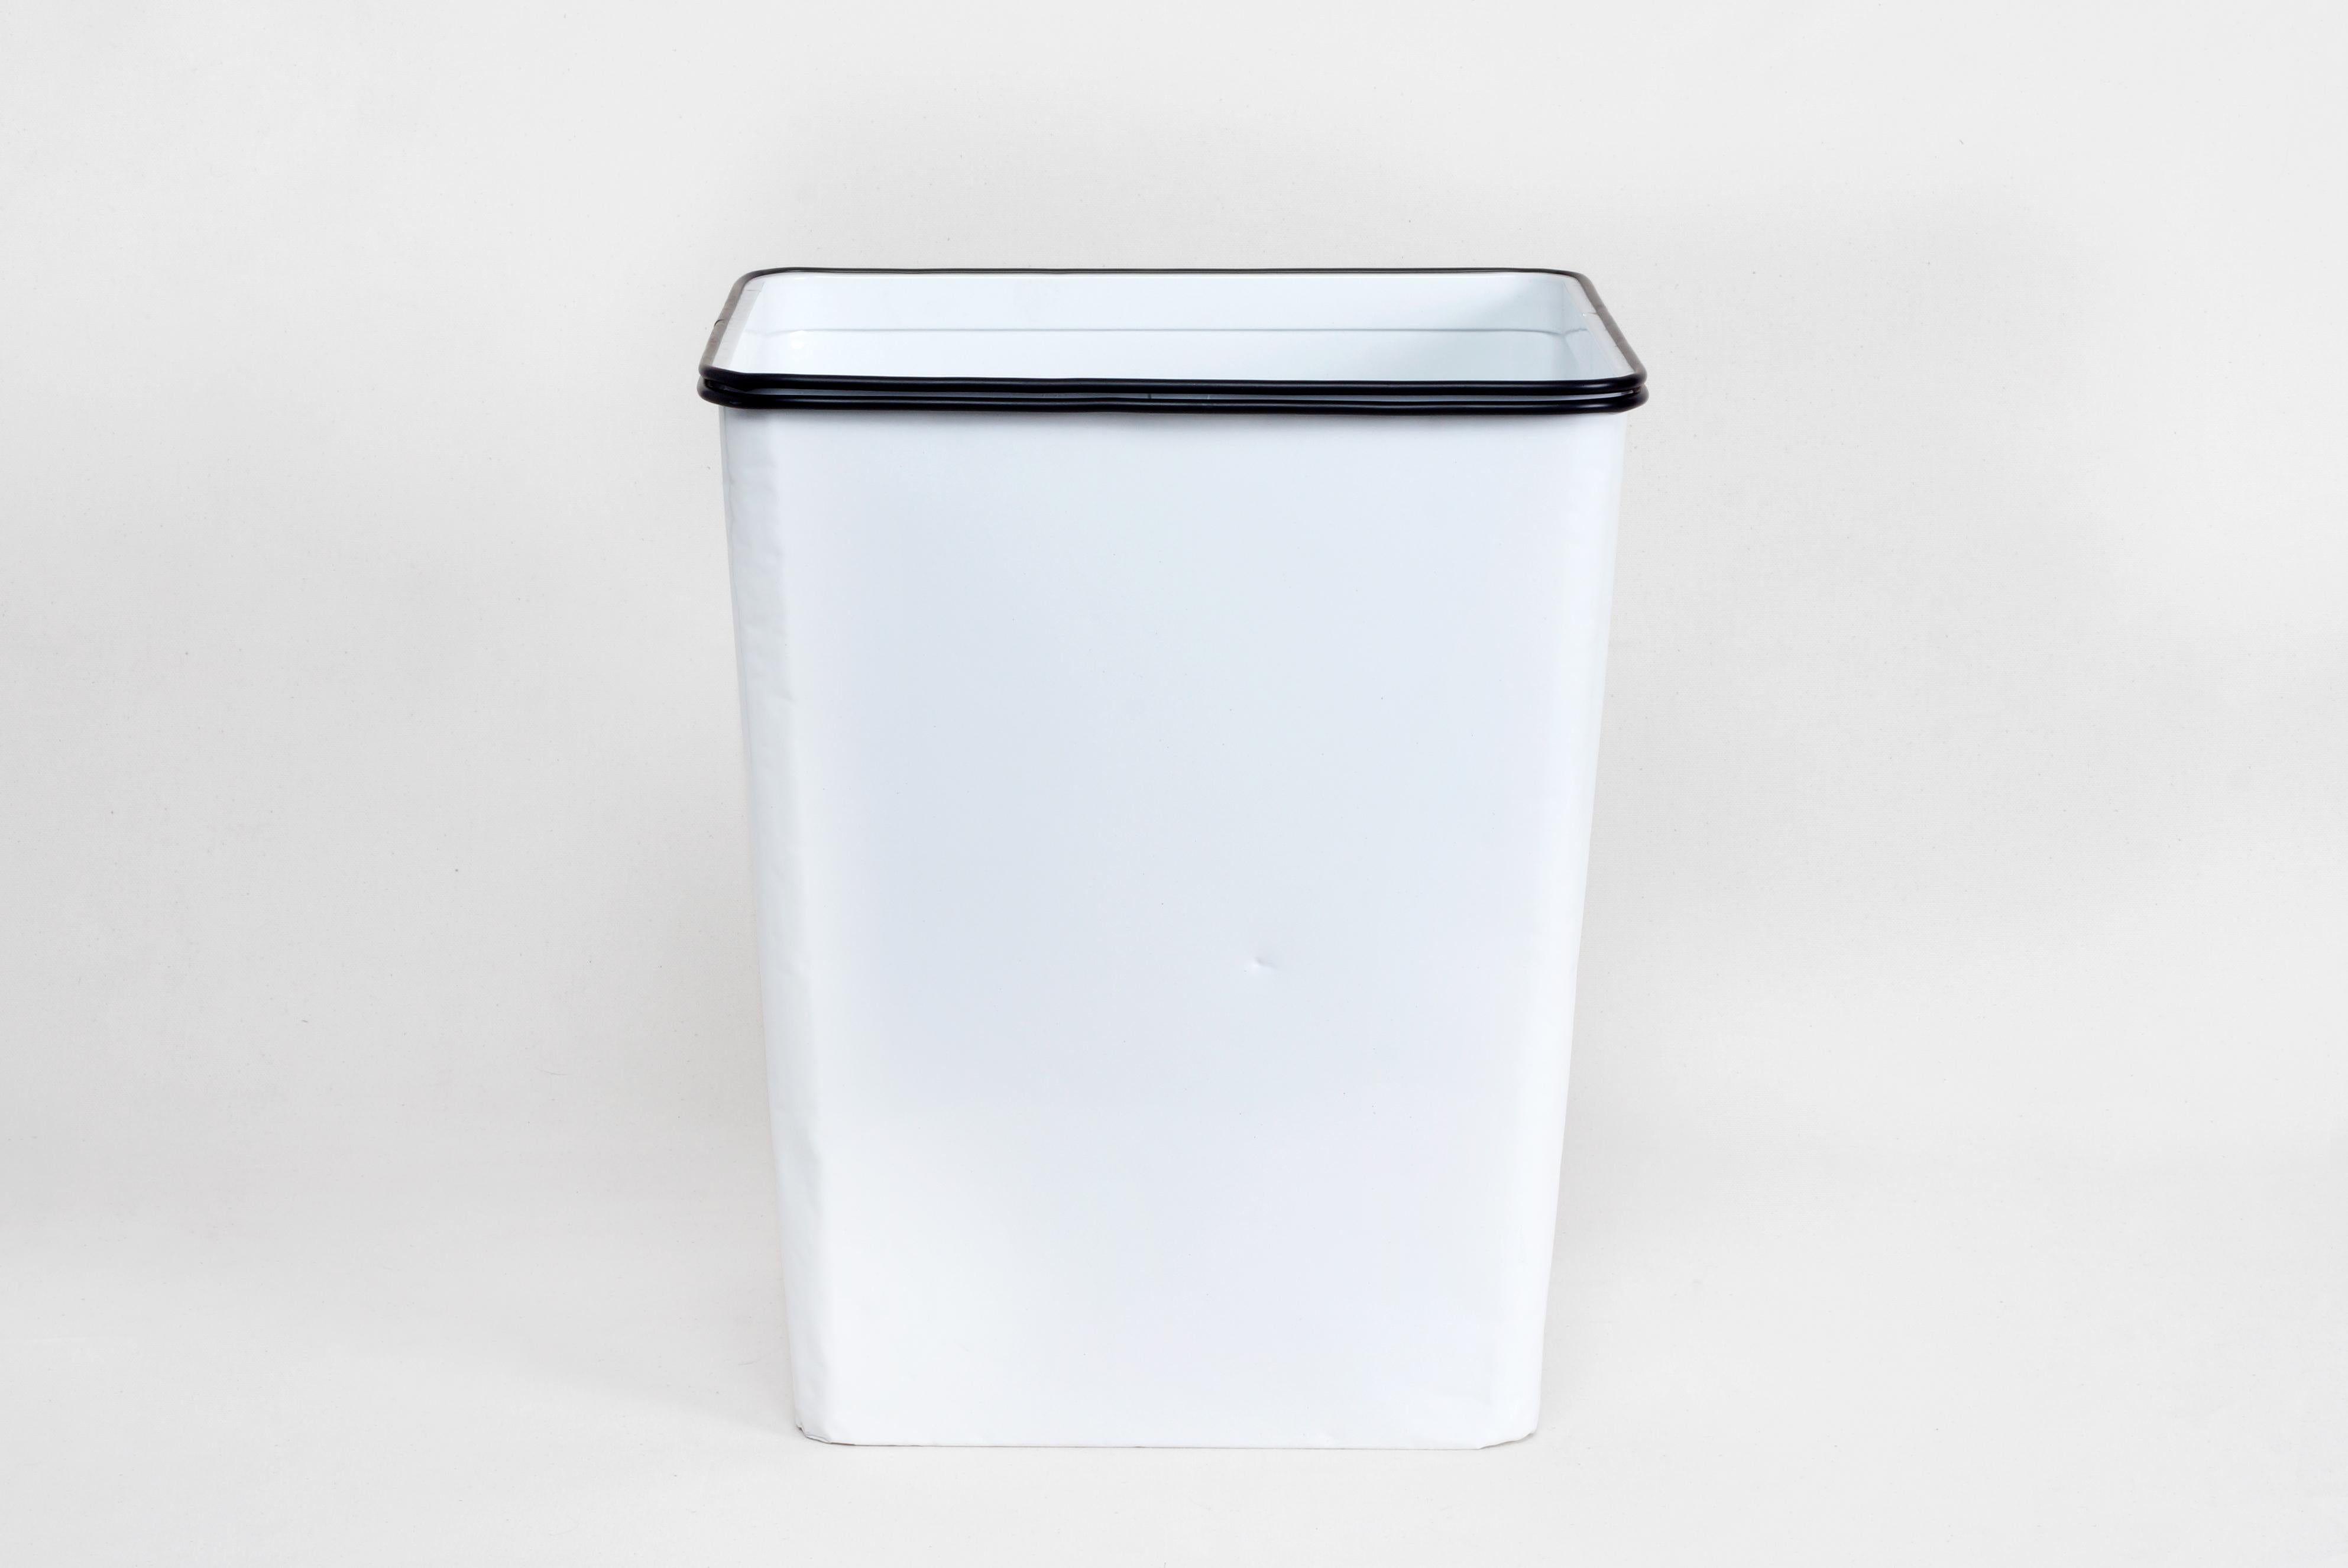 Excellent 1940s steel trash can refinished with a gloss white powder coat. Stamped: ERIE ART METAL, DAN-DEE No. 8, ERIE, PA USA. Tapered rectangular shape with rubber trim. Ideal addition for your office, bathroom or kitchen. Please note gentle